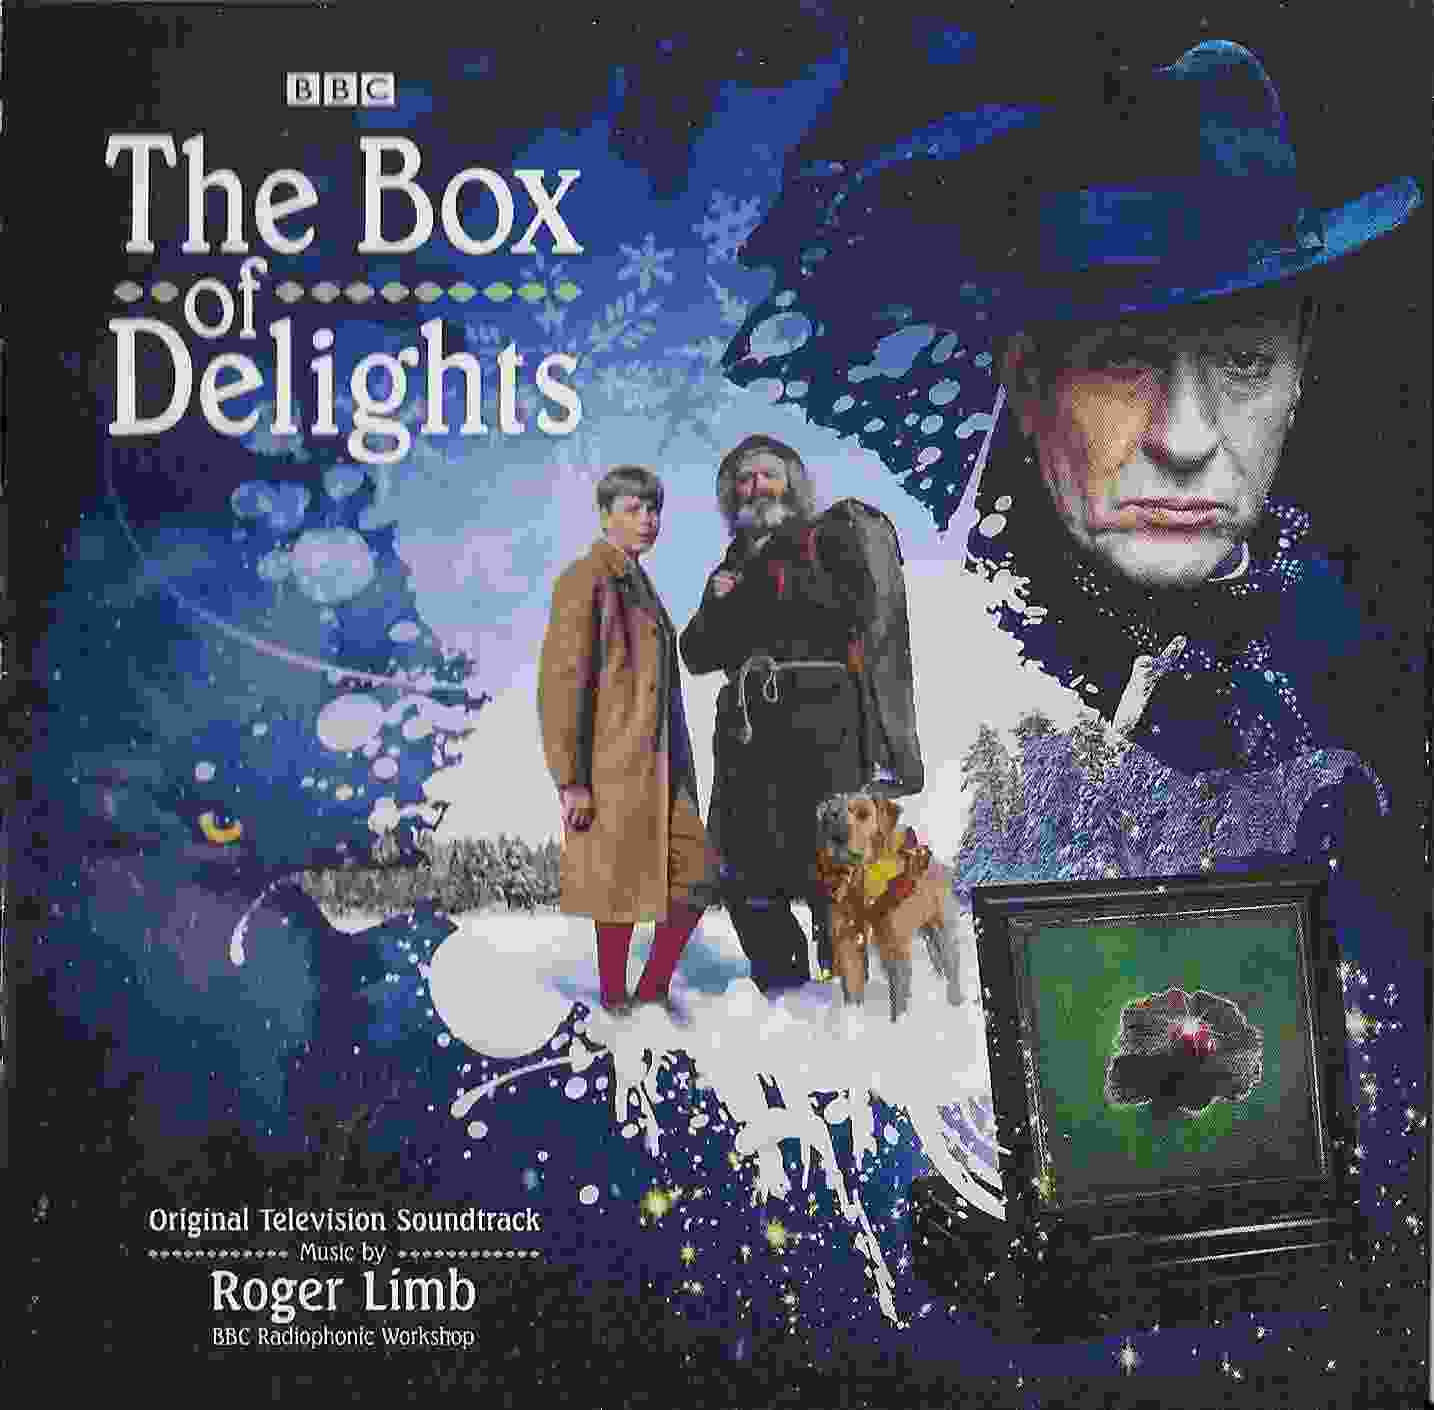 Picture of SILCD 1547 The box of delights by artist Roger Limb and the BBC Radiophonic Workshop from the BBC cds - Records and Tapes library